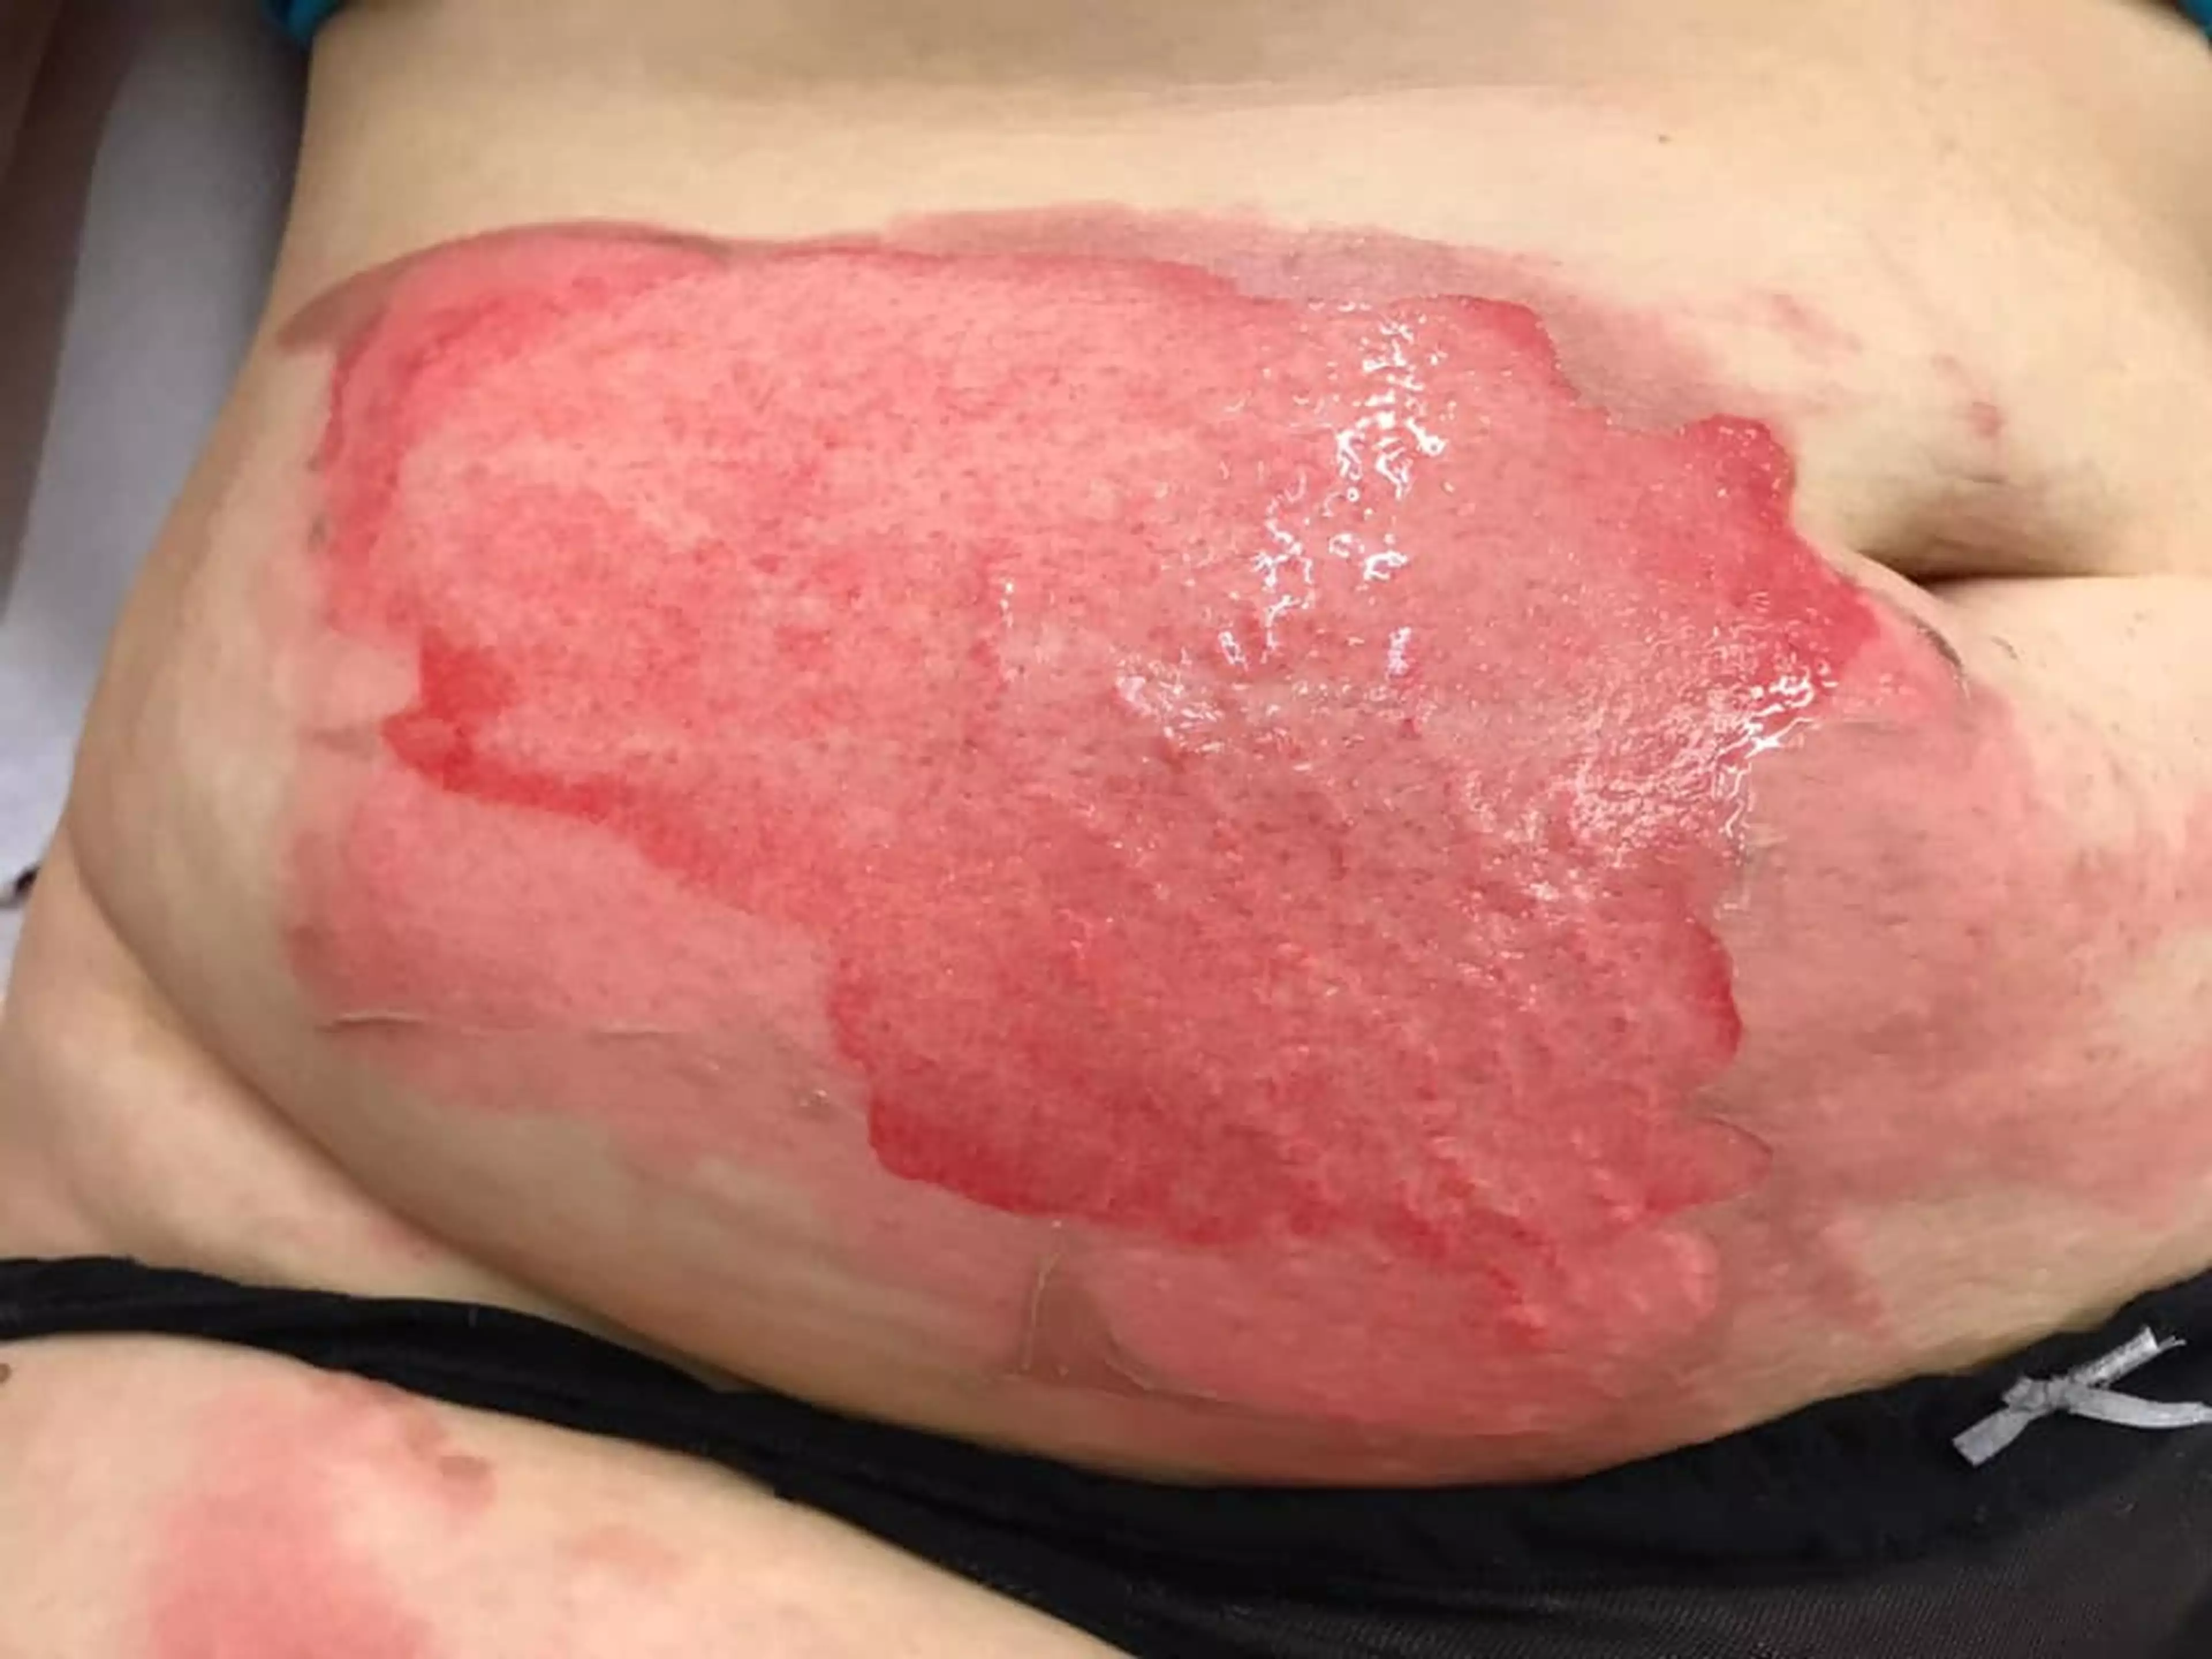 Sophie received severe burns on her stomach